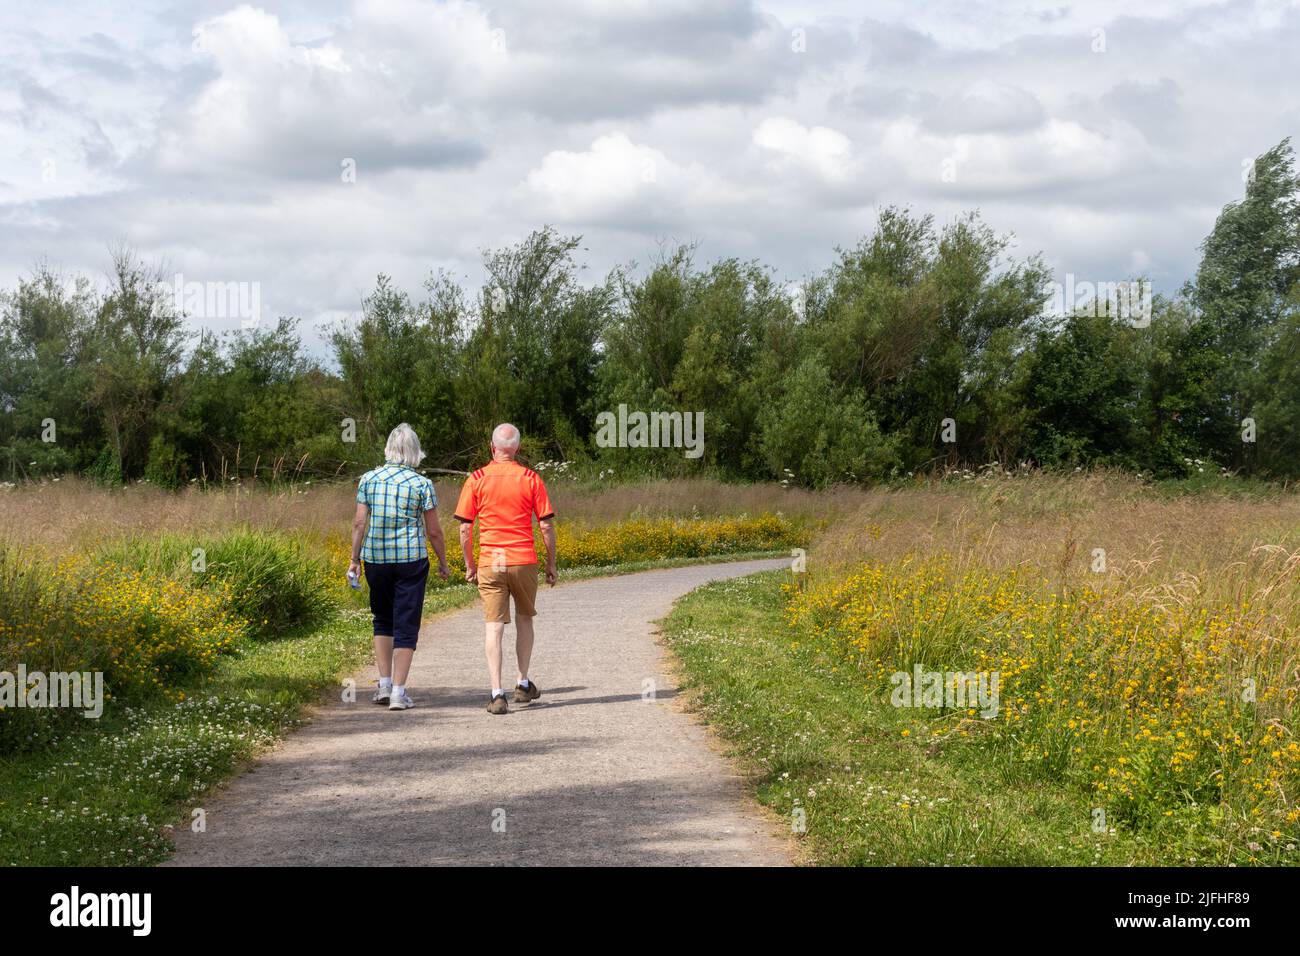 Edenbrook Country Park near Fleet, Hampshire, England, UK. Older couple walking along a path through wildflowers on a sunny summer day. Stock Photo